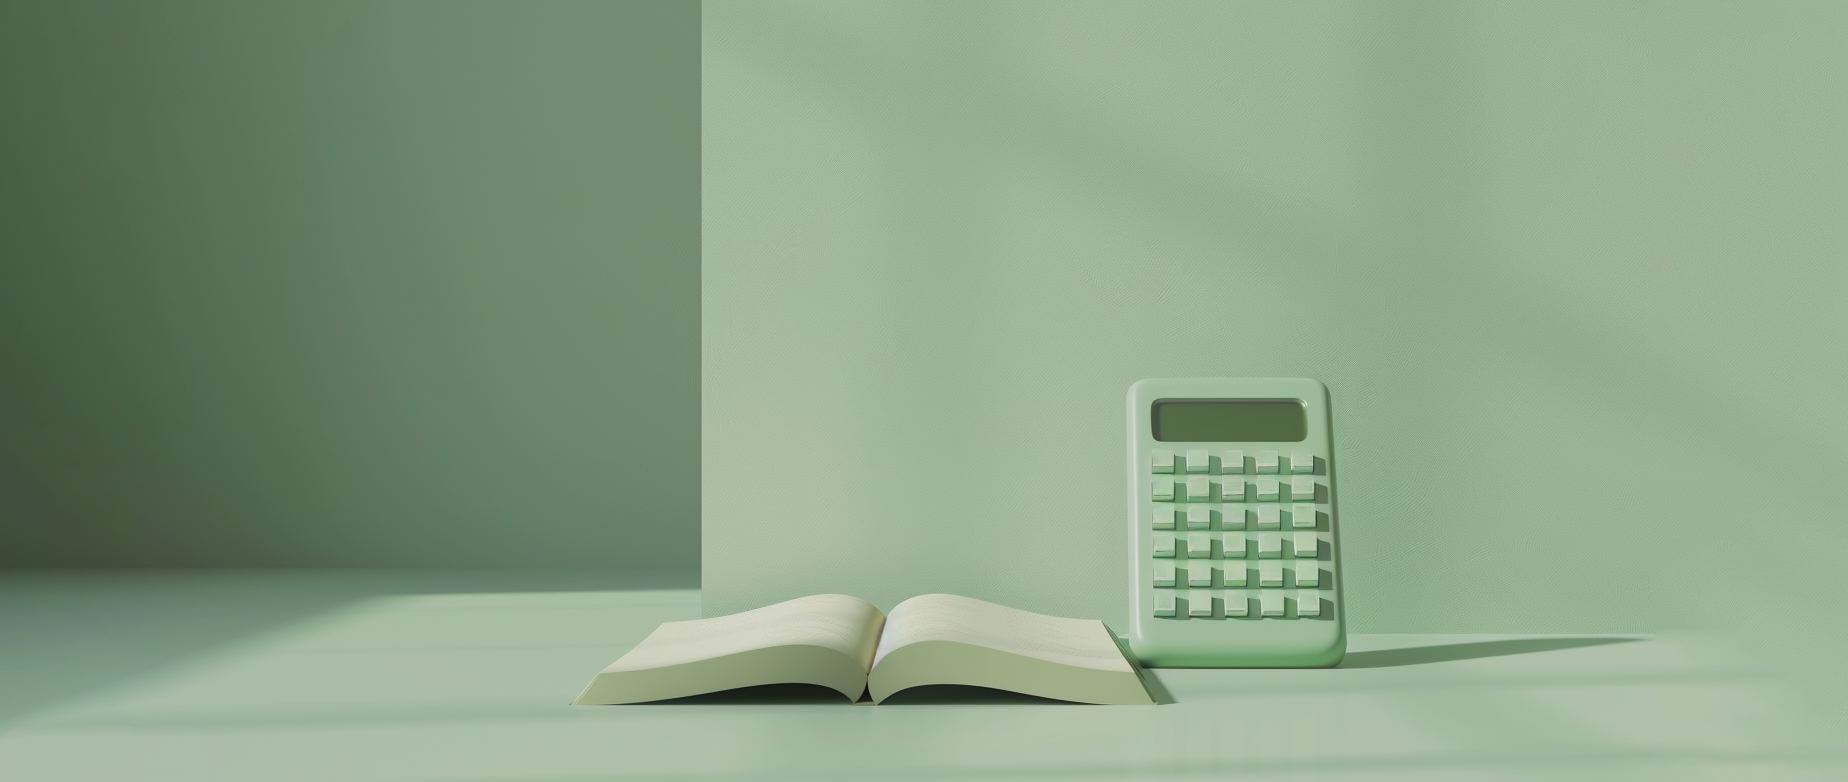 An open book next to a calculator on a green background.